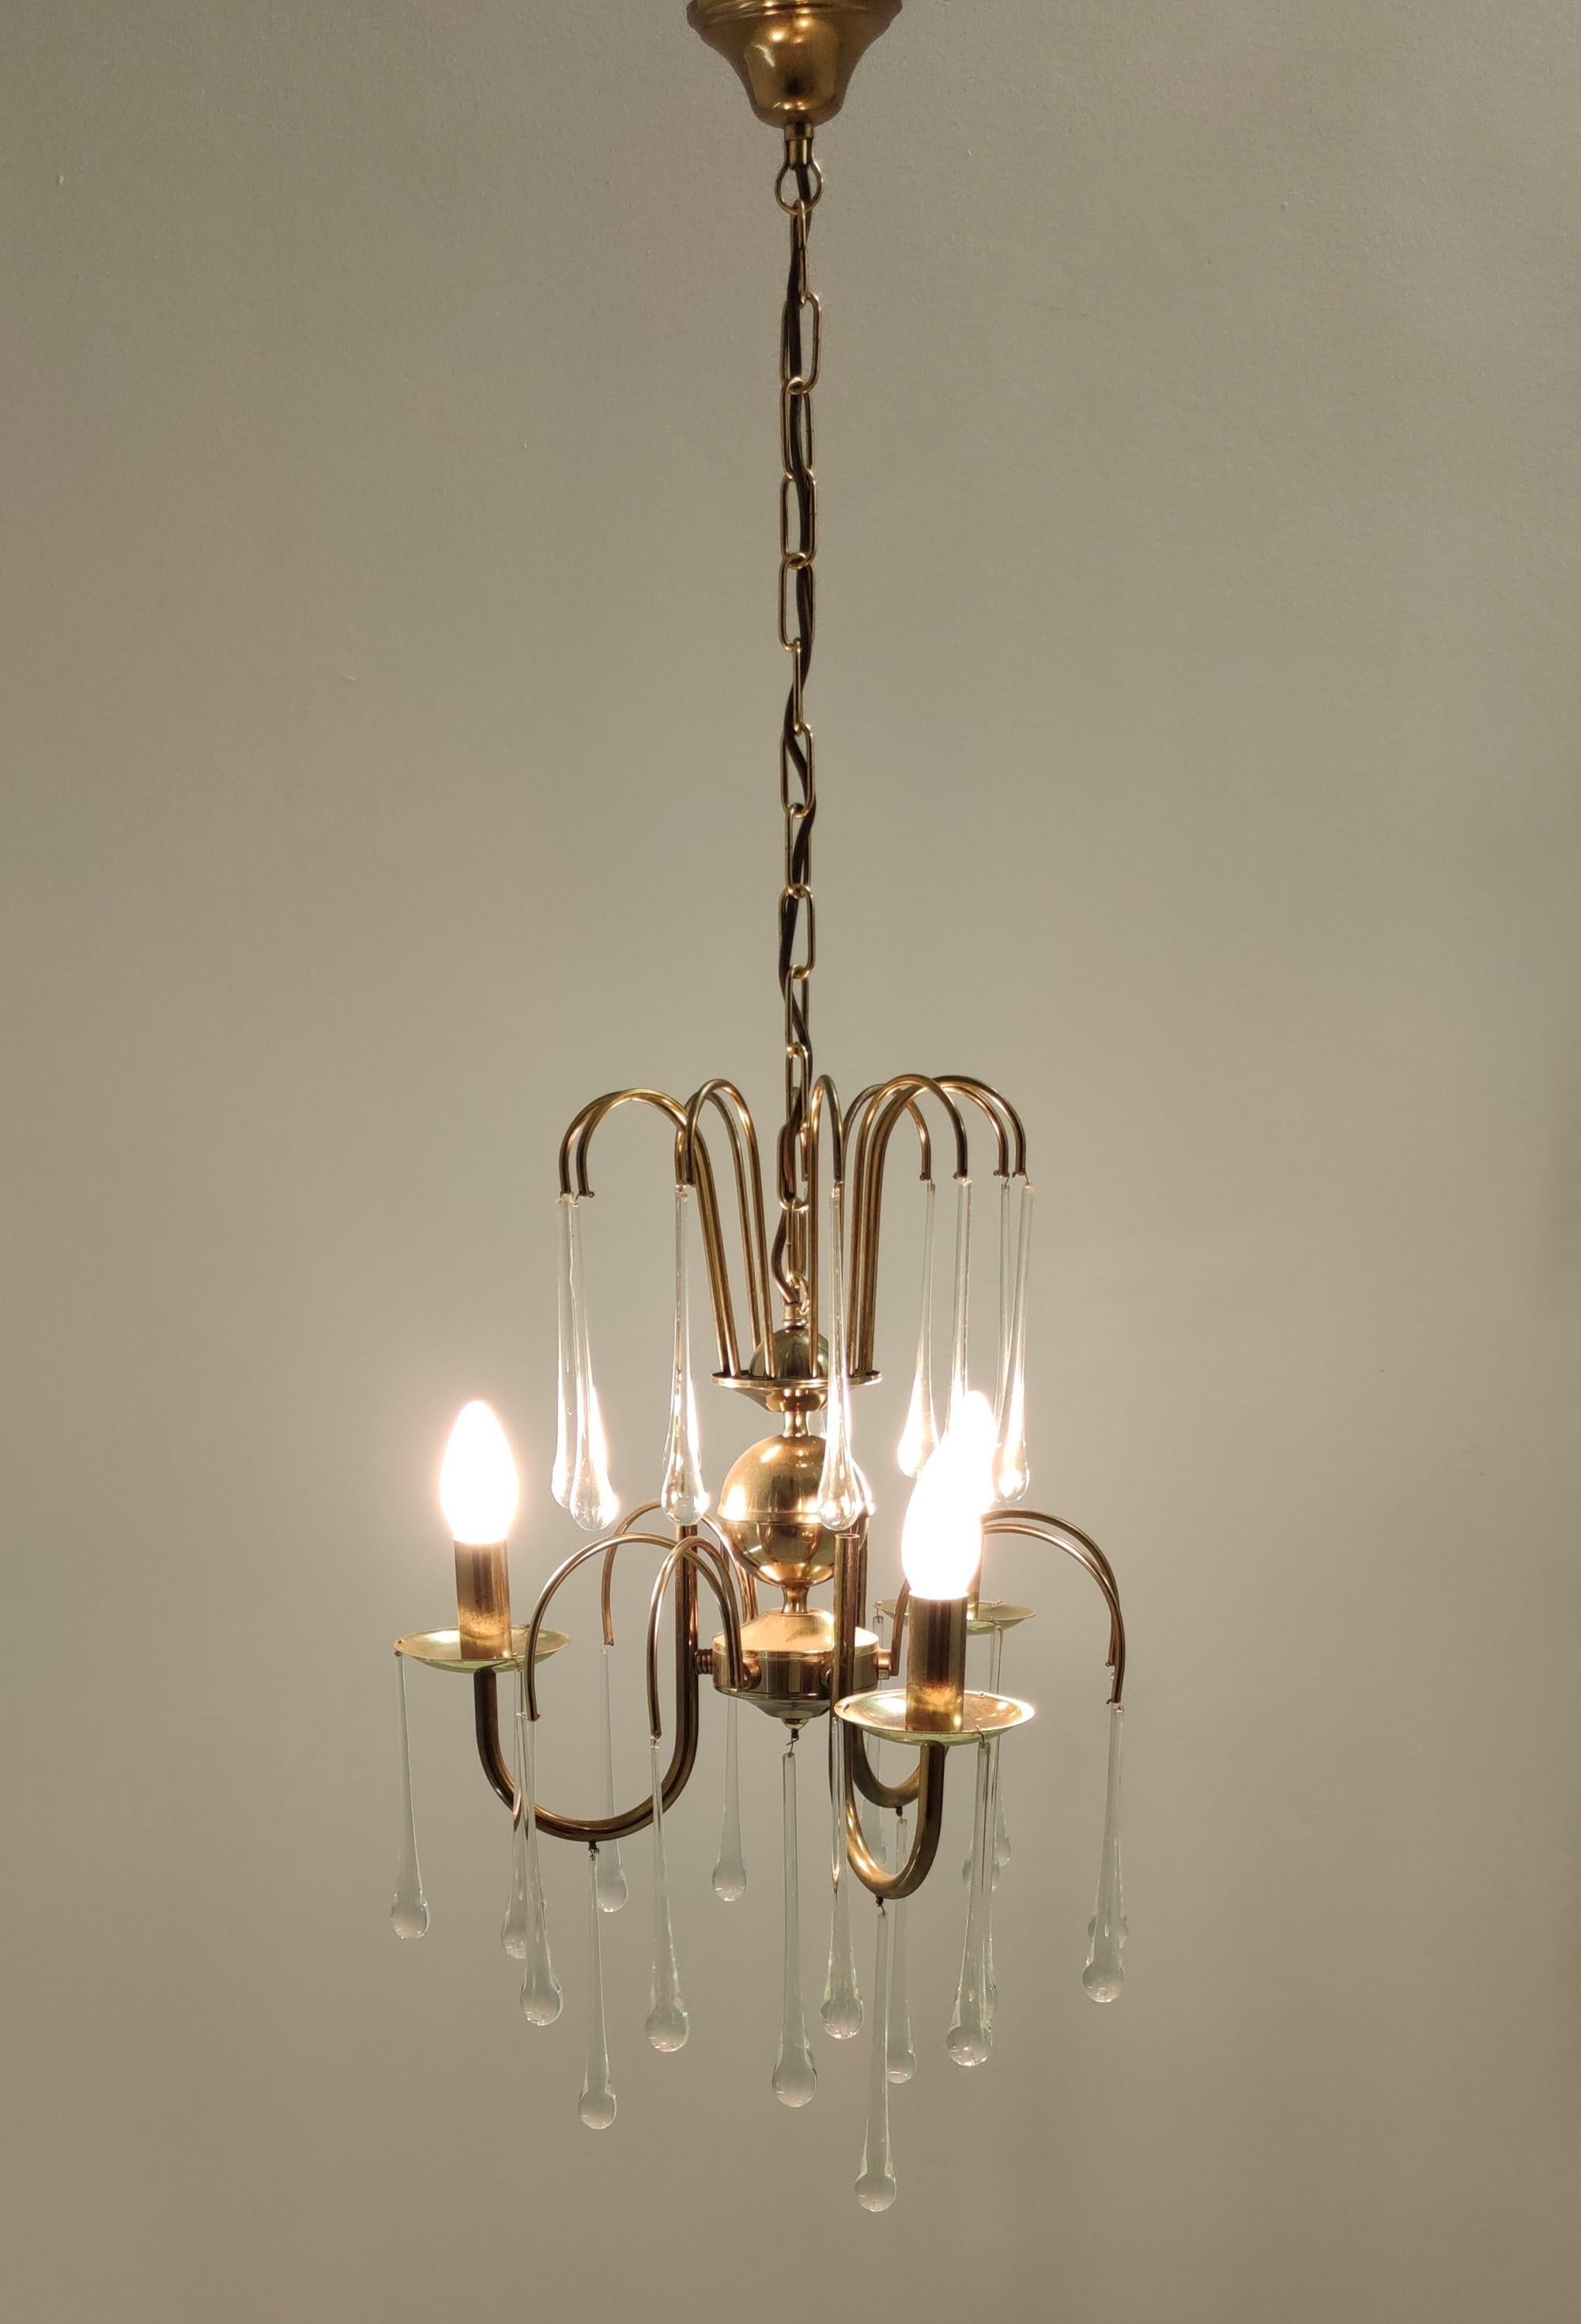 Made in Italy, 1970s.
This chandelier features a brass frame with three arms and 28 Murano glass drops.
It is vintage, therefore it might show slight traces of use, but it can be considered as in excellent original condition and ready to give